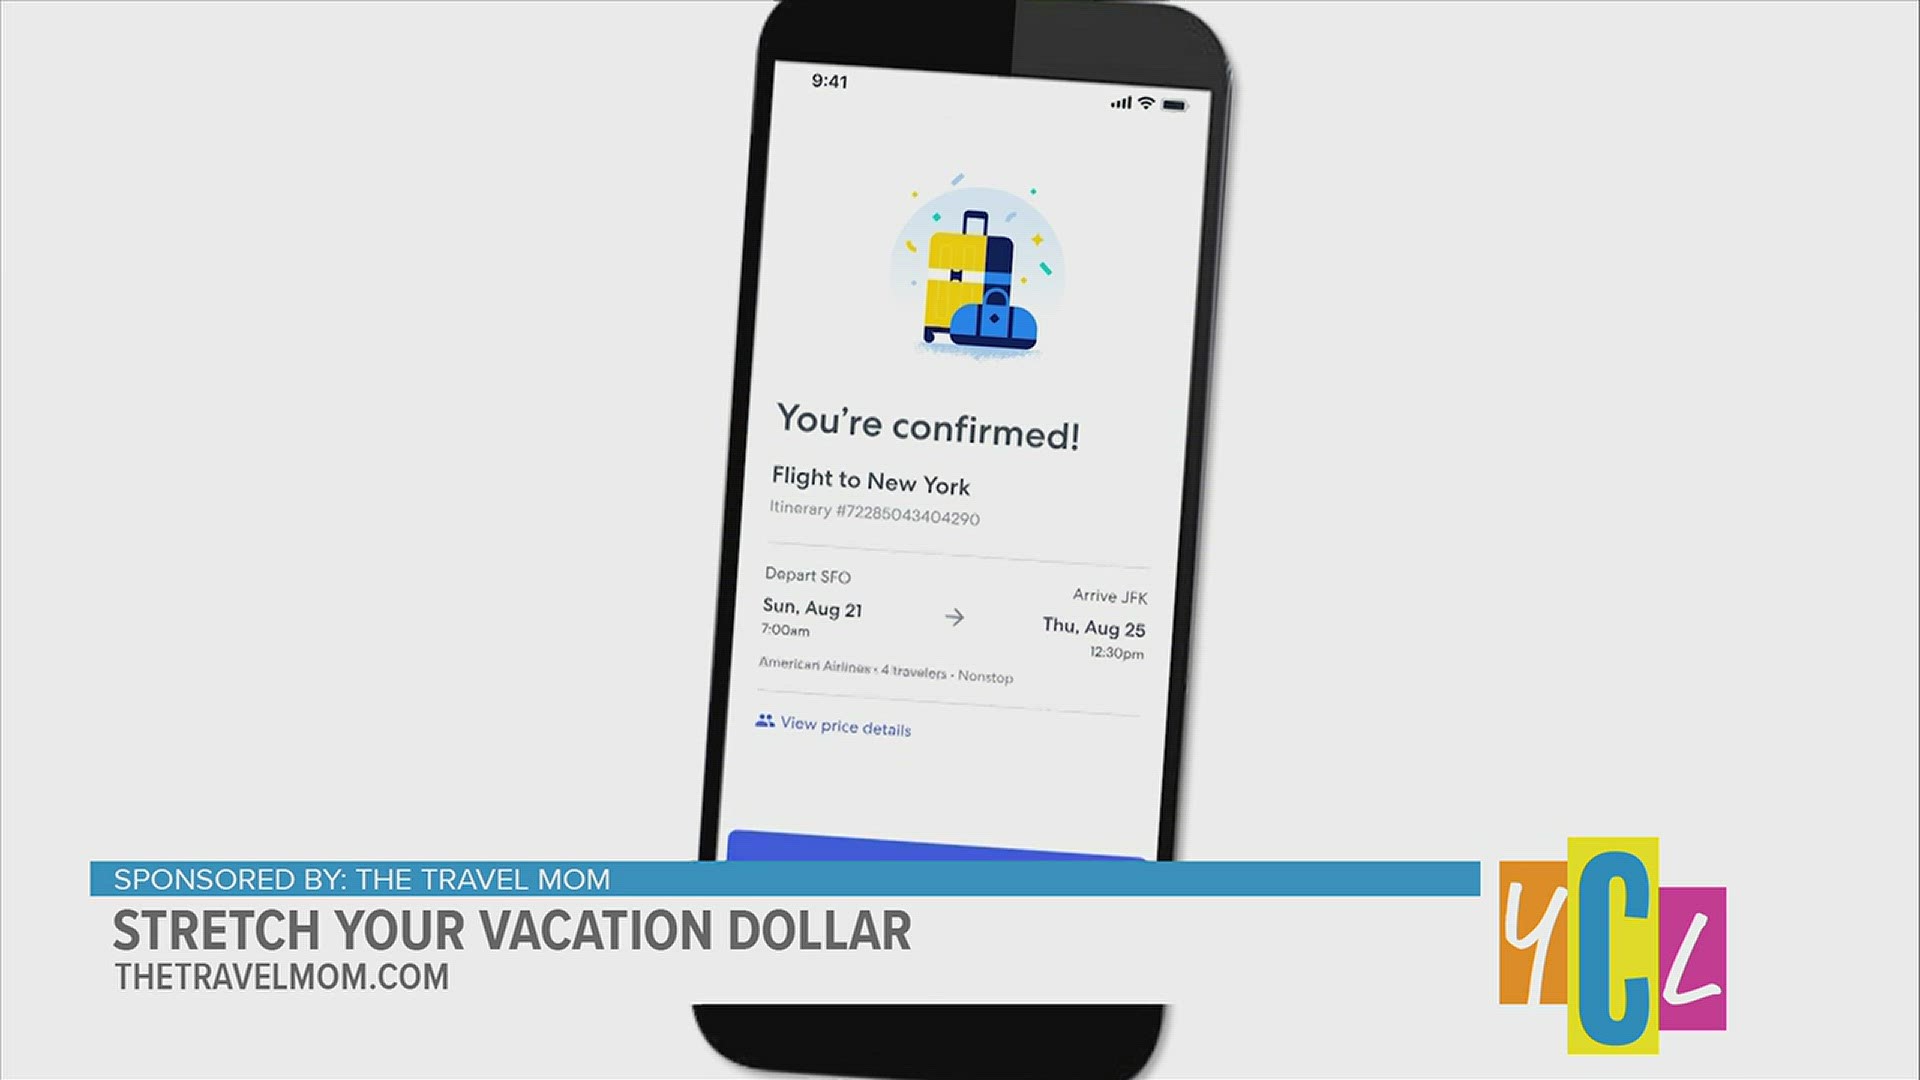 Searches for summer trips are currently up more than 10 percent from last year. Stretch your vacation dollar with these tips! This segment is paid by The Travel Mom.